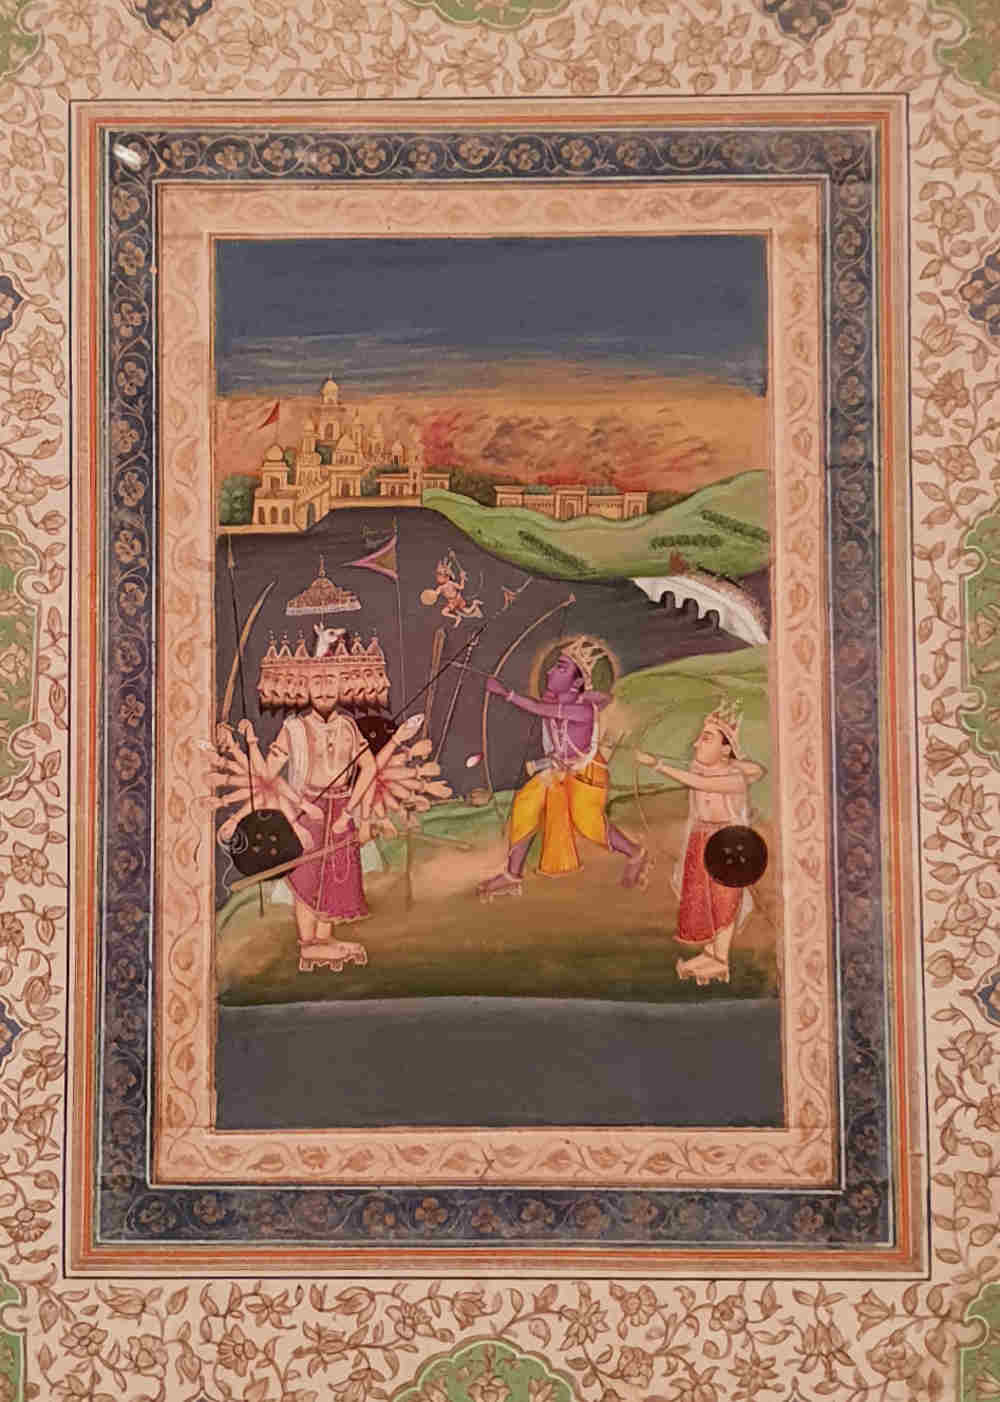 Splendours of the Subcontinent, Queen’s Gallery, Buckingham Palace, South Asian paintings